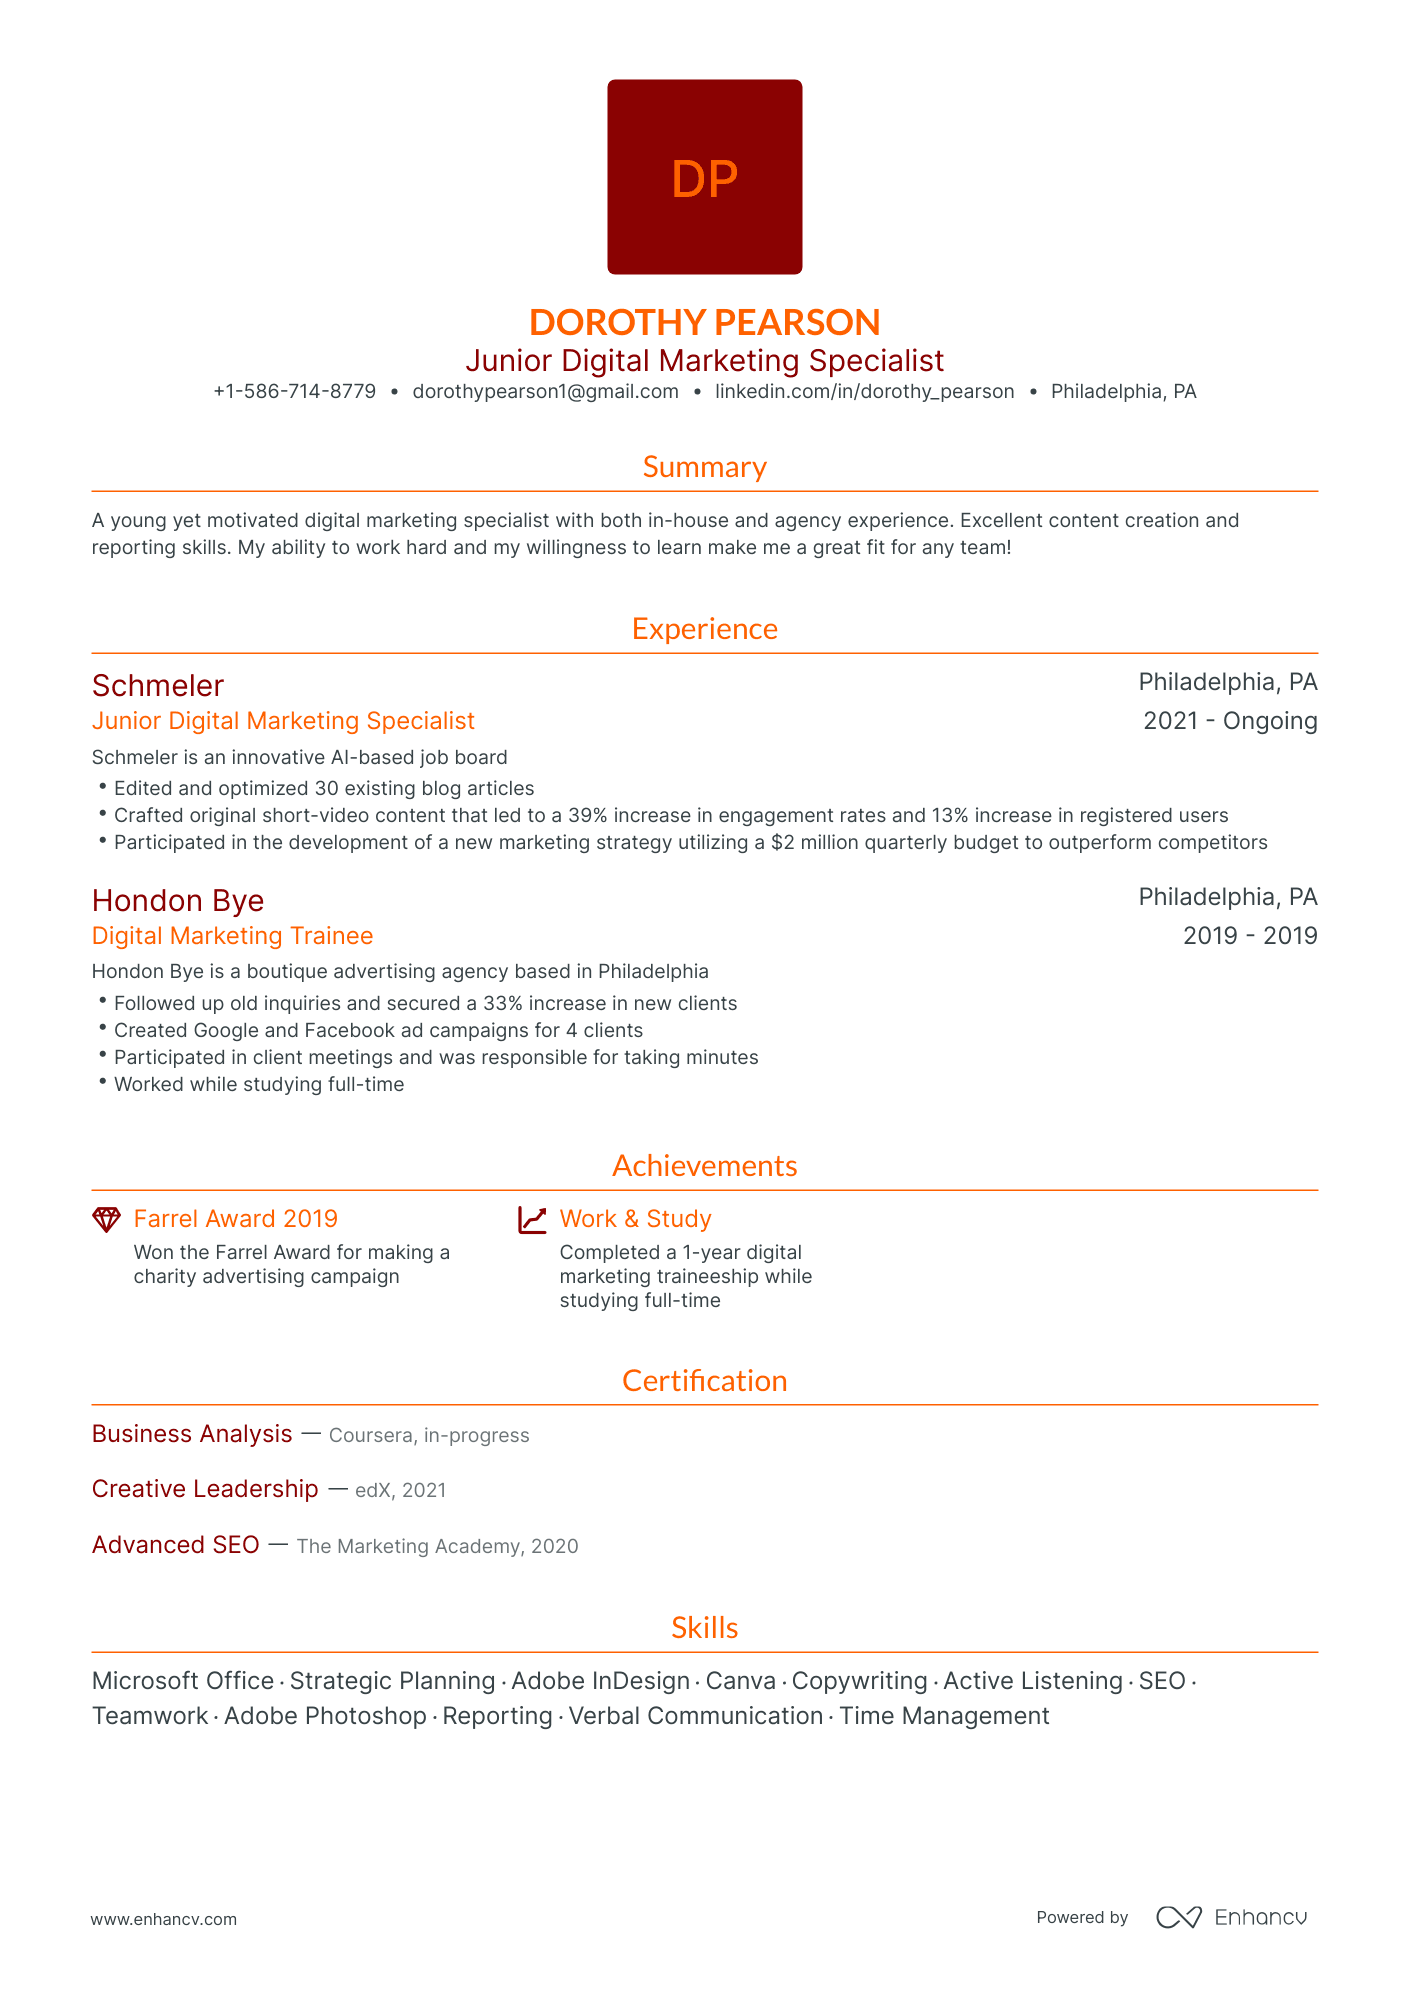 Traditional Entry Level Digital Marketing Resume Template